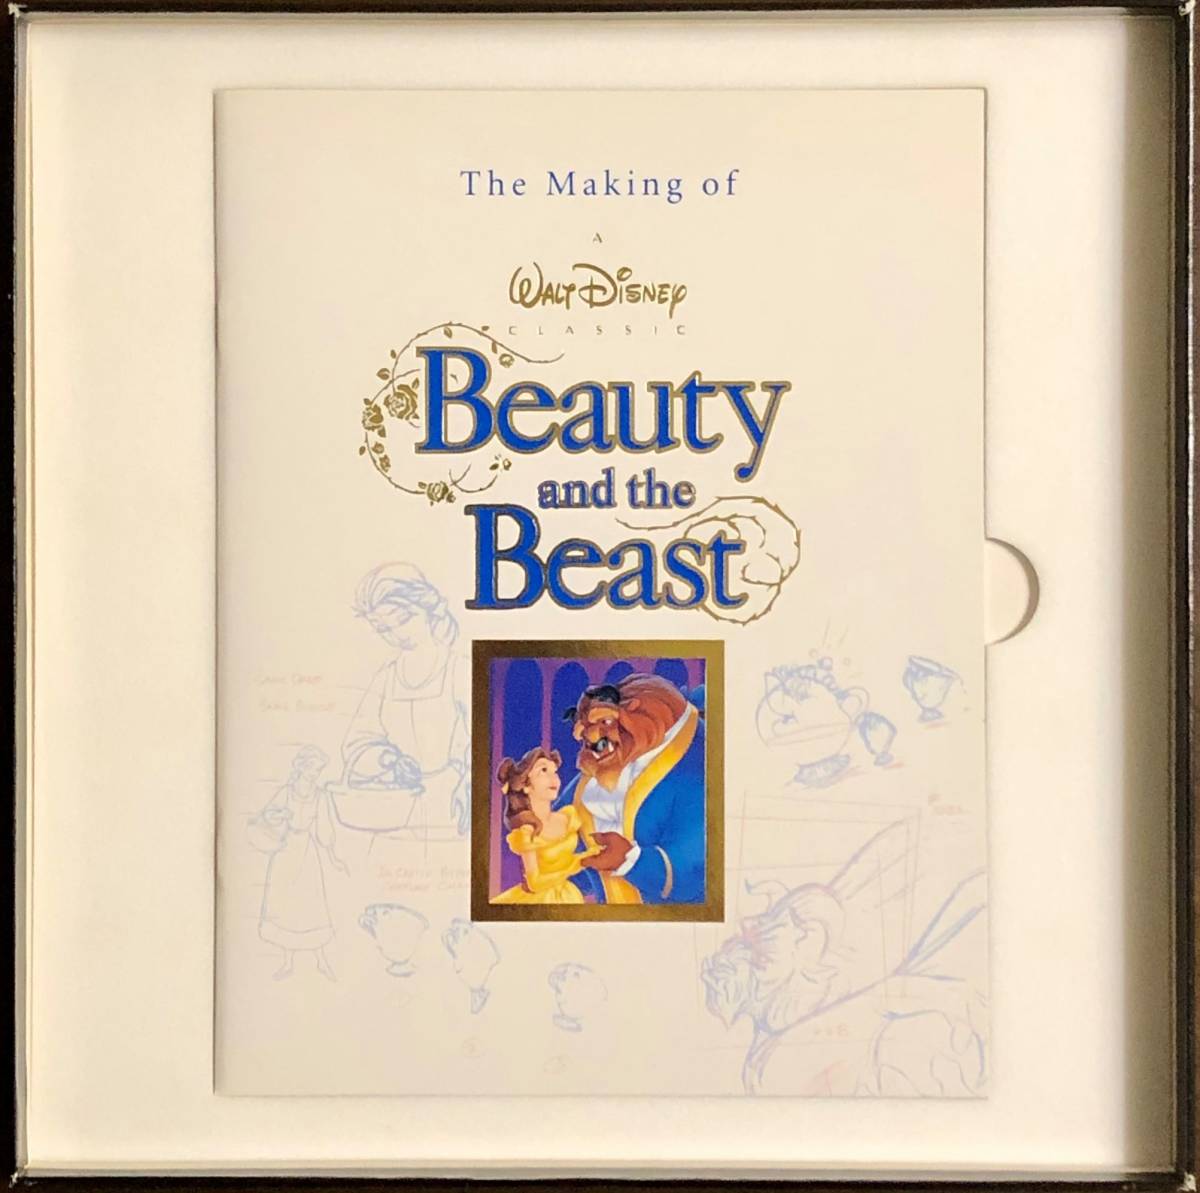 LD box set [ Beauty and the Beast ] special collection (book@ compilation CLV / privilege disk CAV all 3 sheets set )